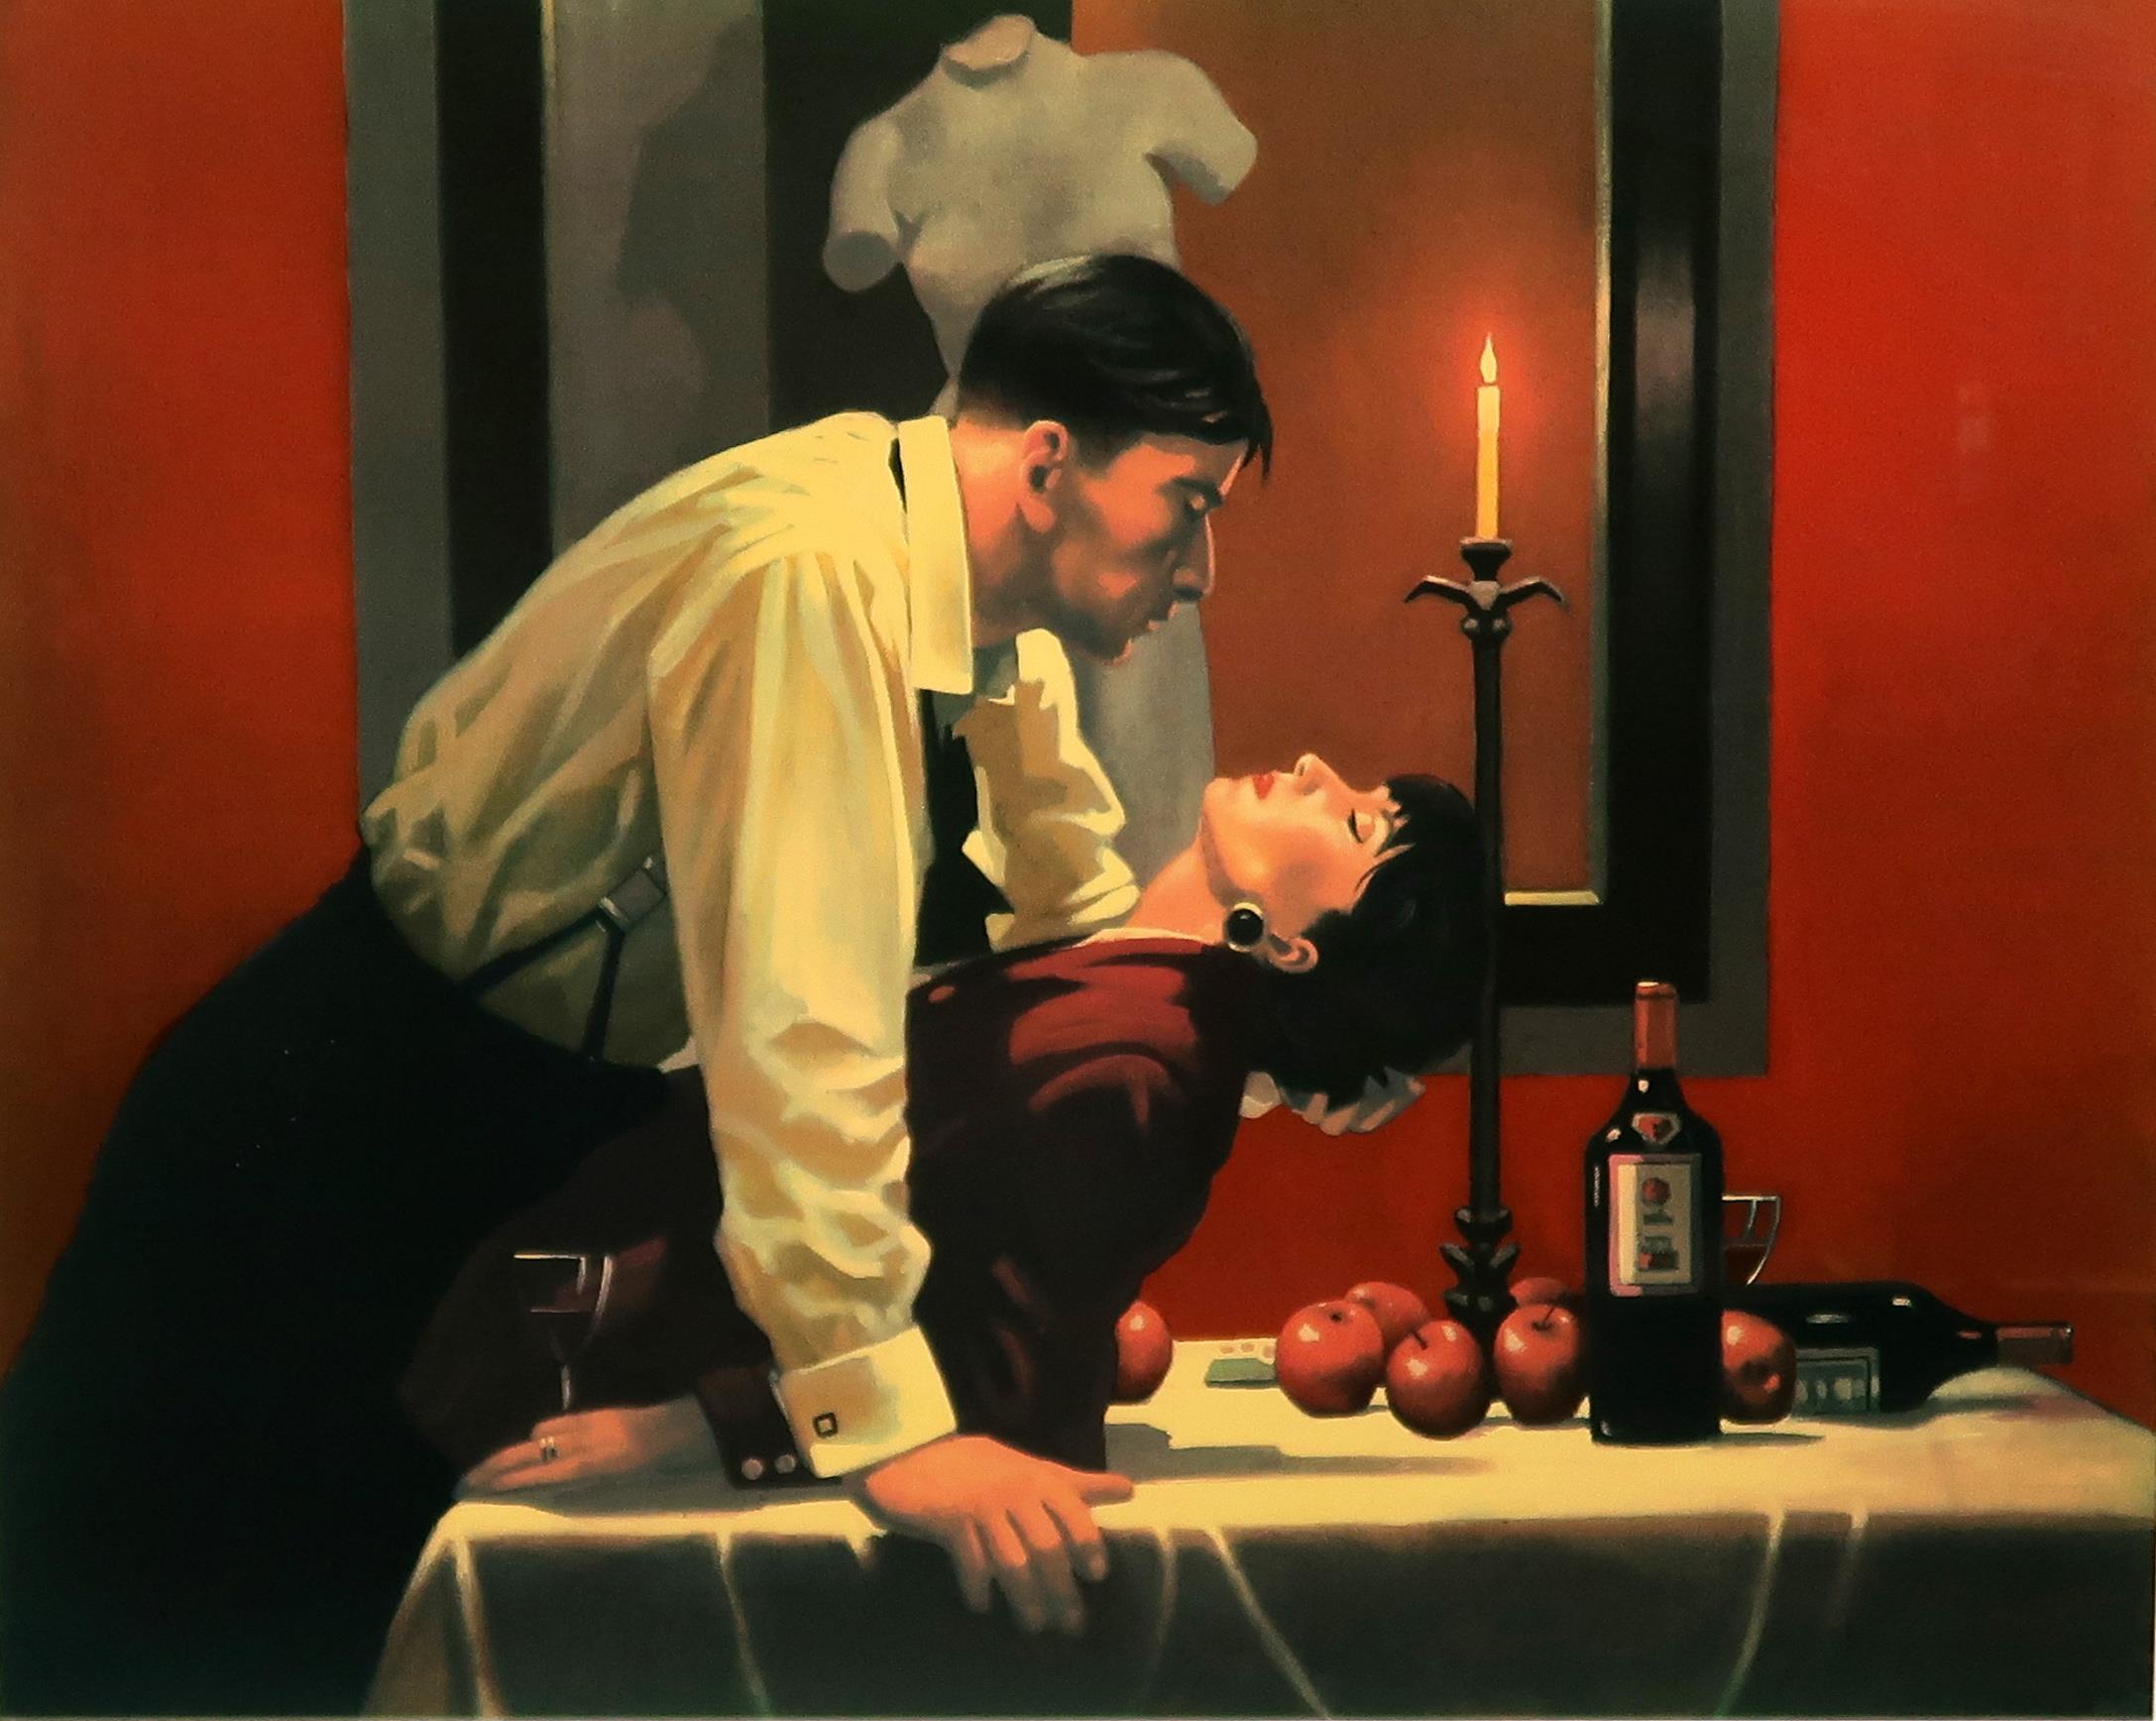 AFTER JACK VETTRIANO (SCOTTISH, b.1951) THE PARTY'S OVER Photographic print, signed in pencil (lower